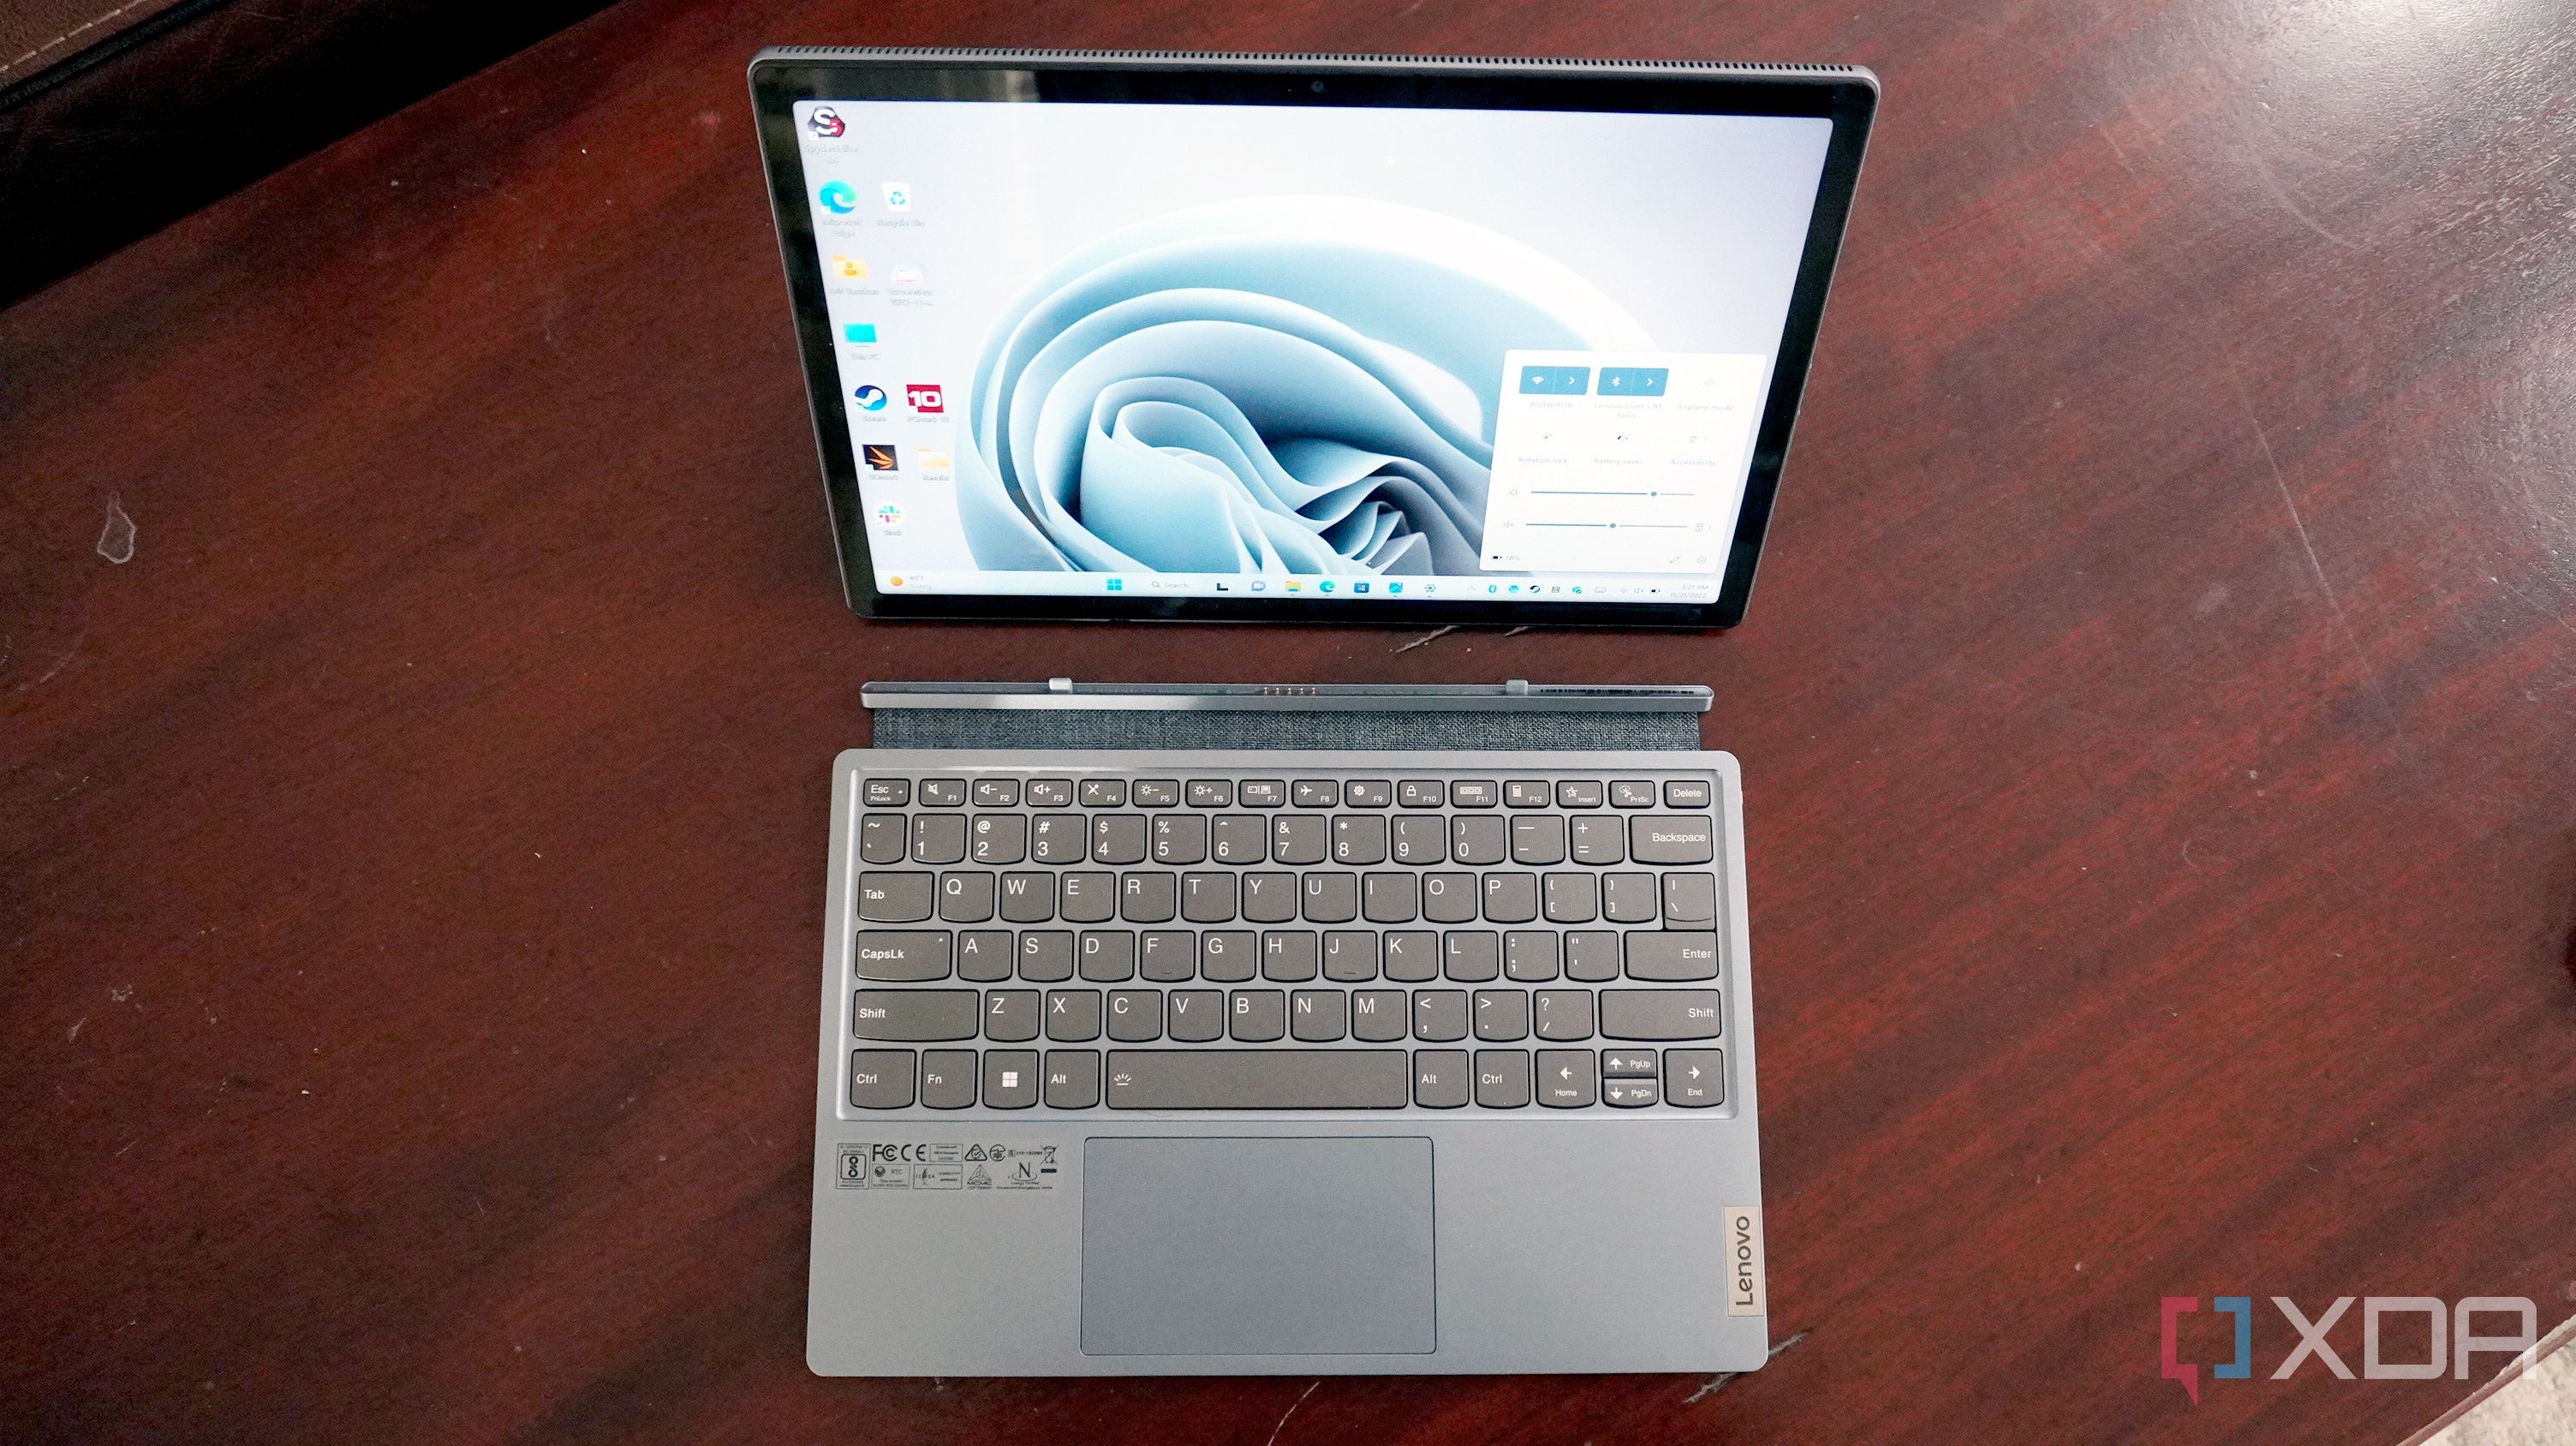 The IdeaPad Duet 5i keyboard detached from the screen and in use.